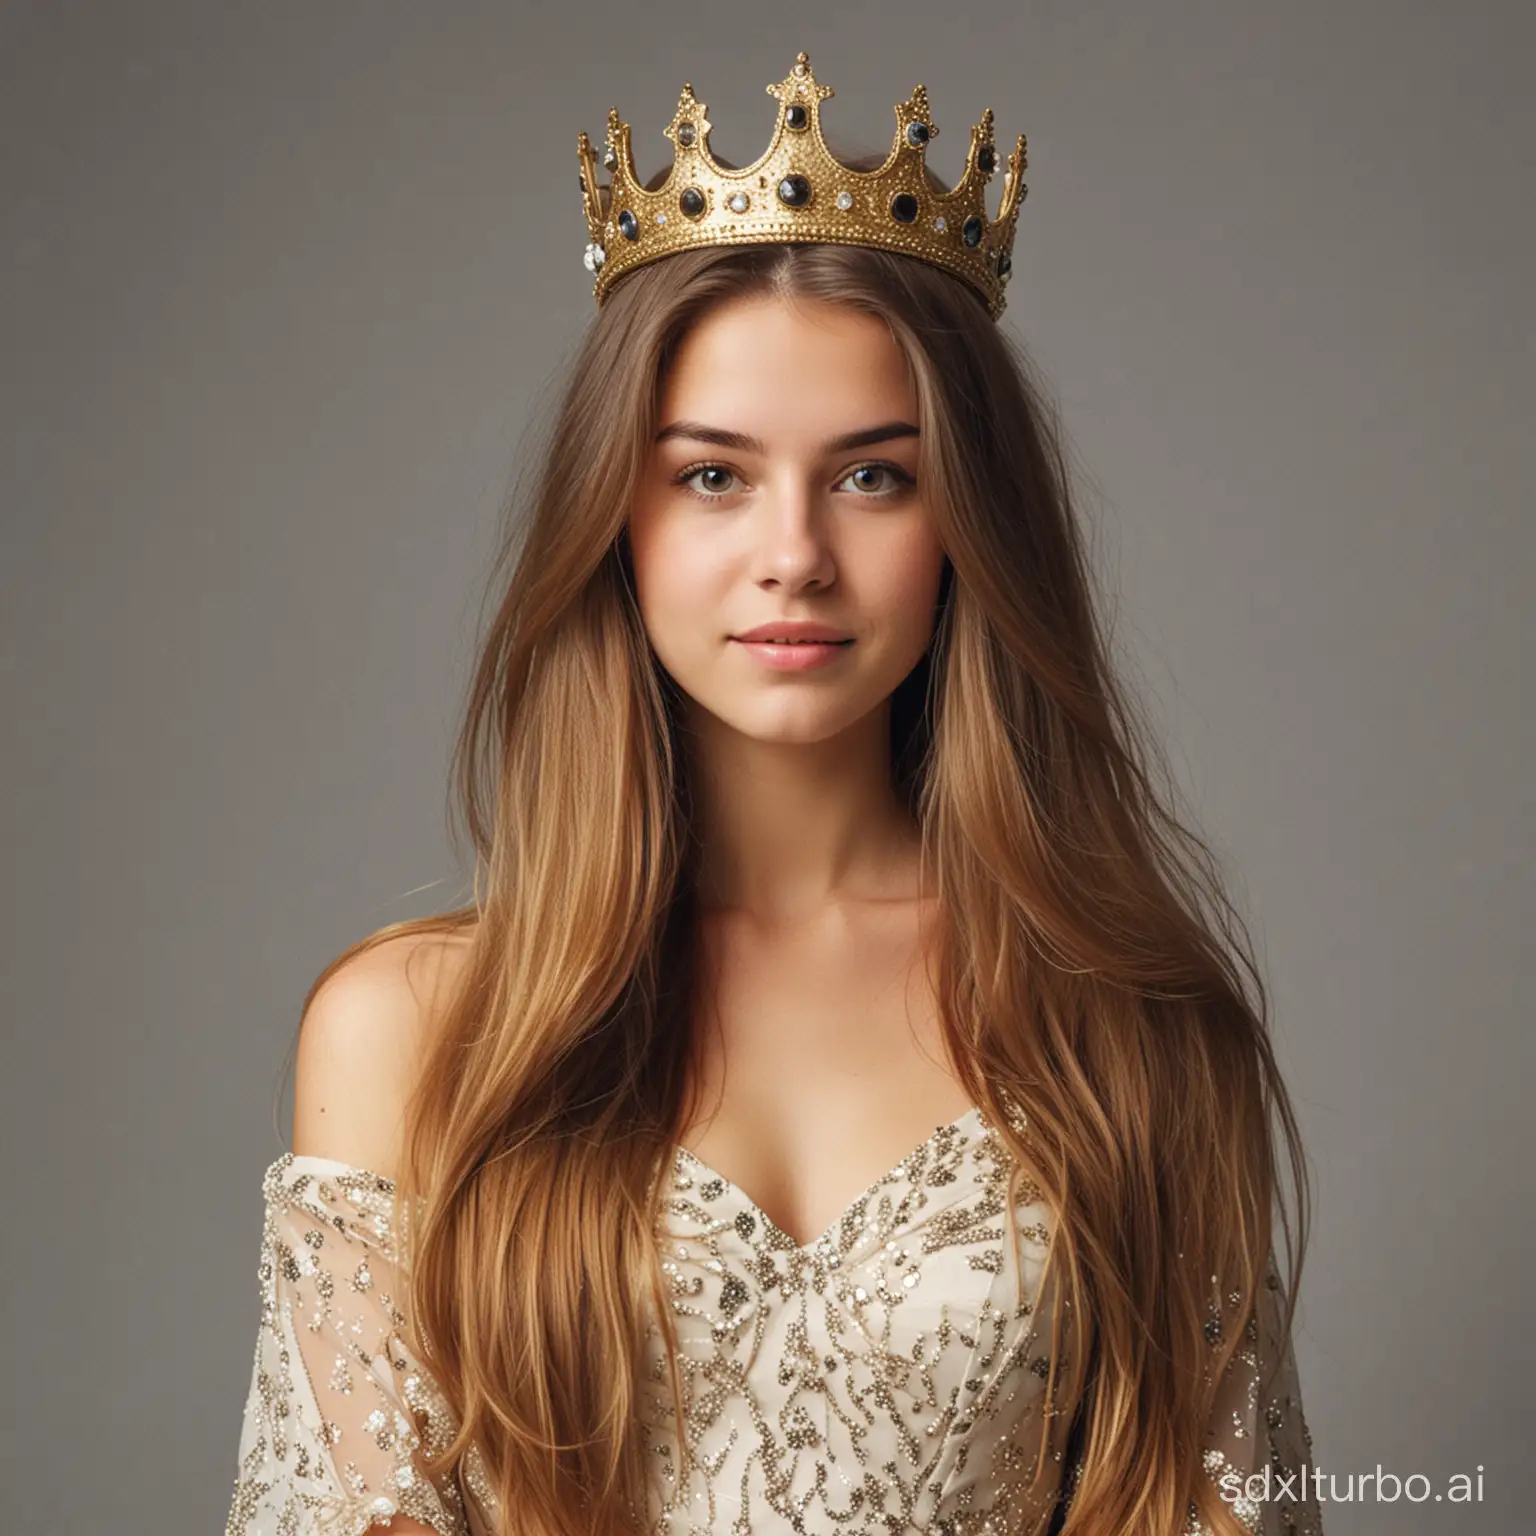 a 25 year old girl with a crown and a dress with long hair